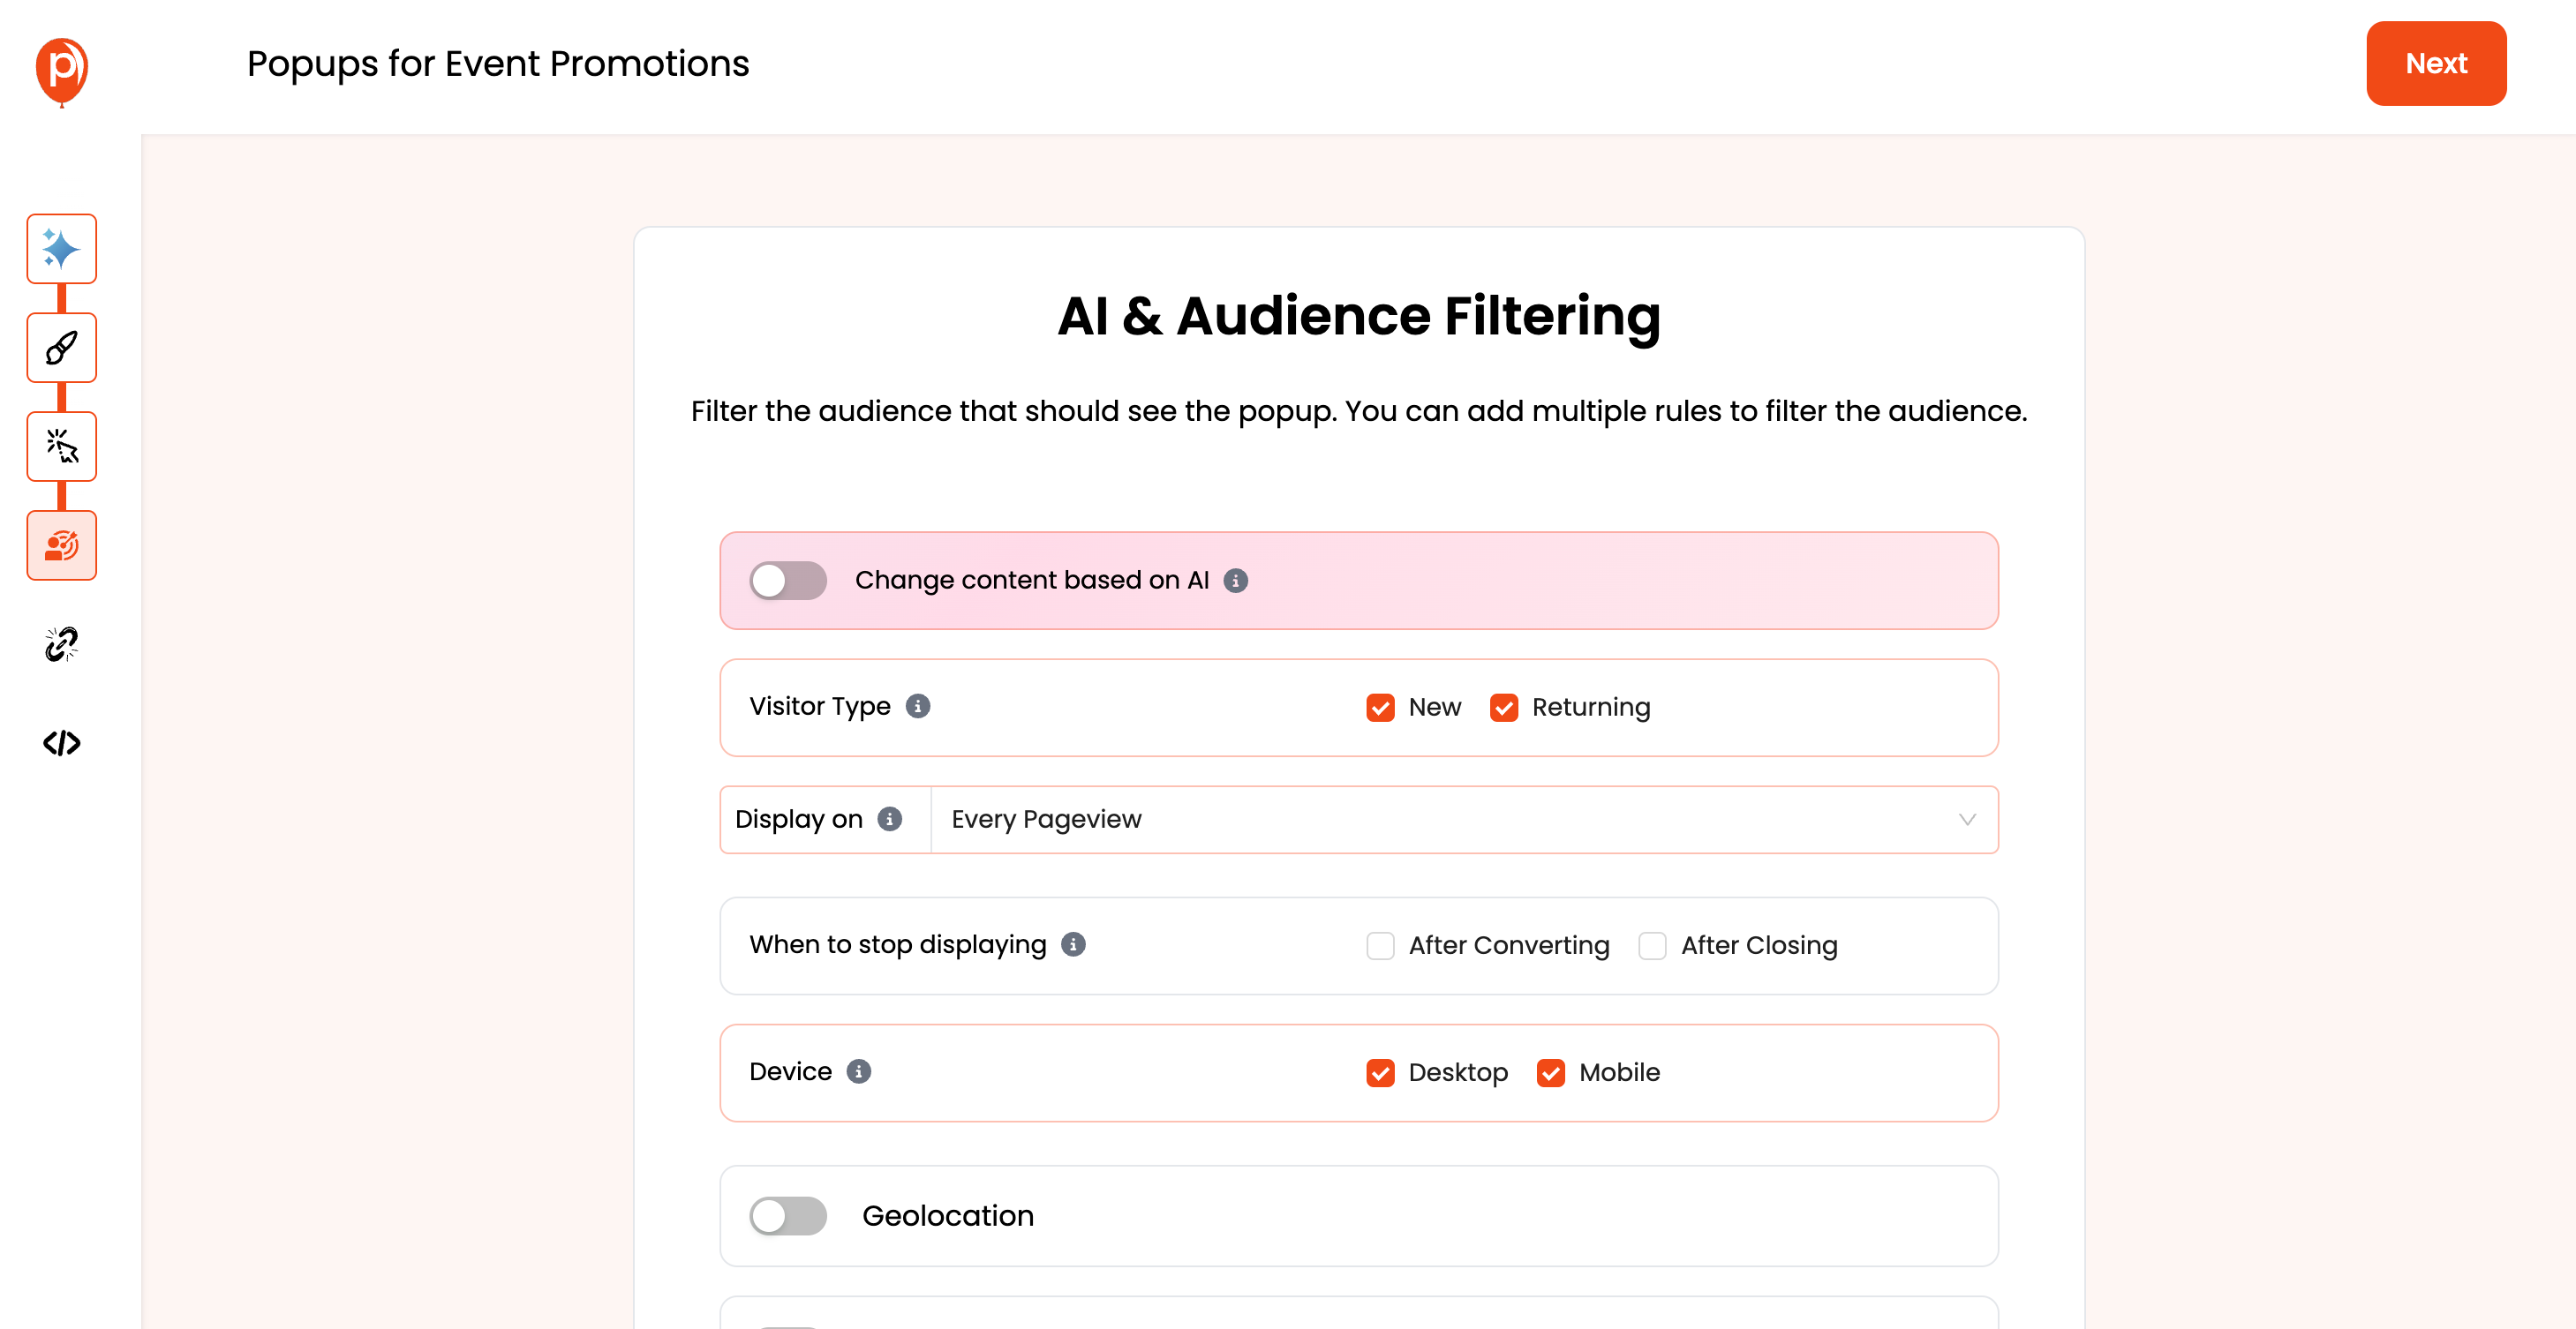 Audience Filtering